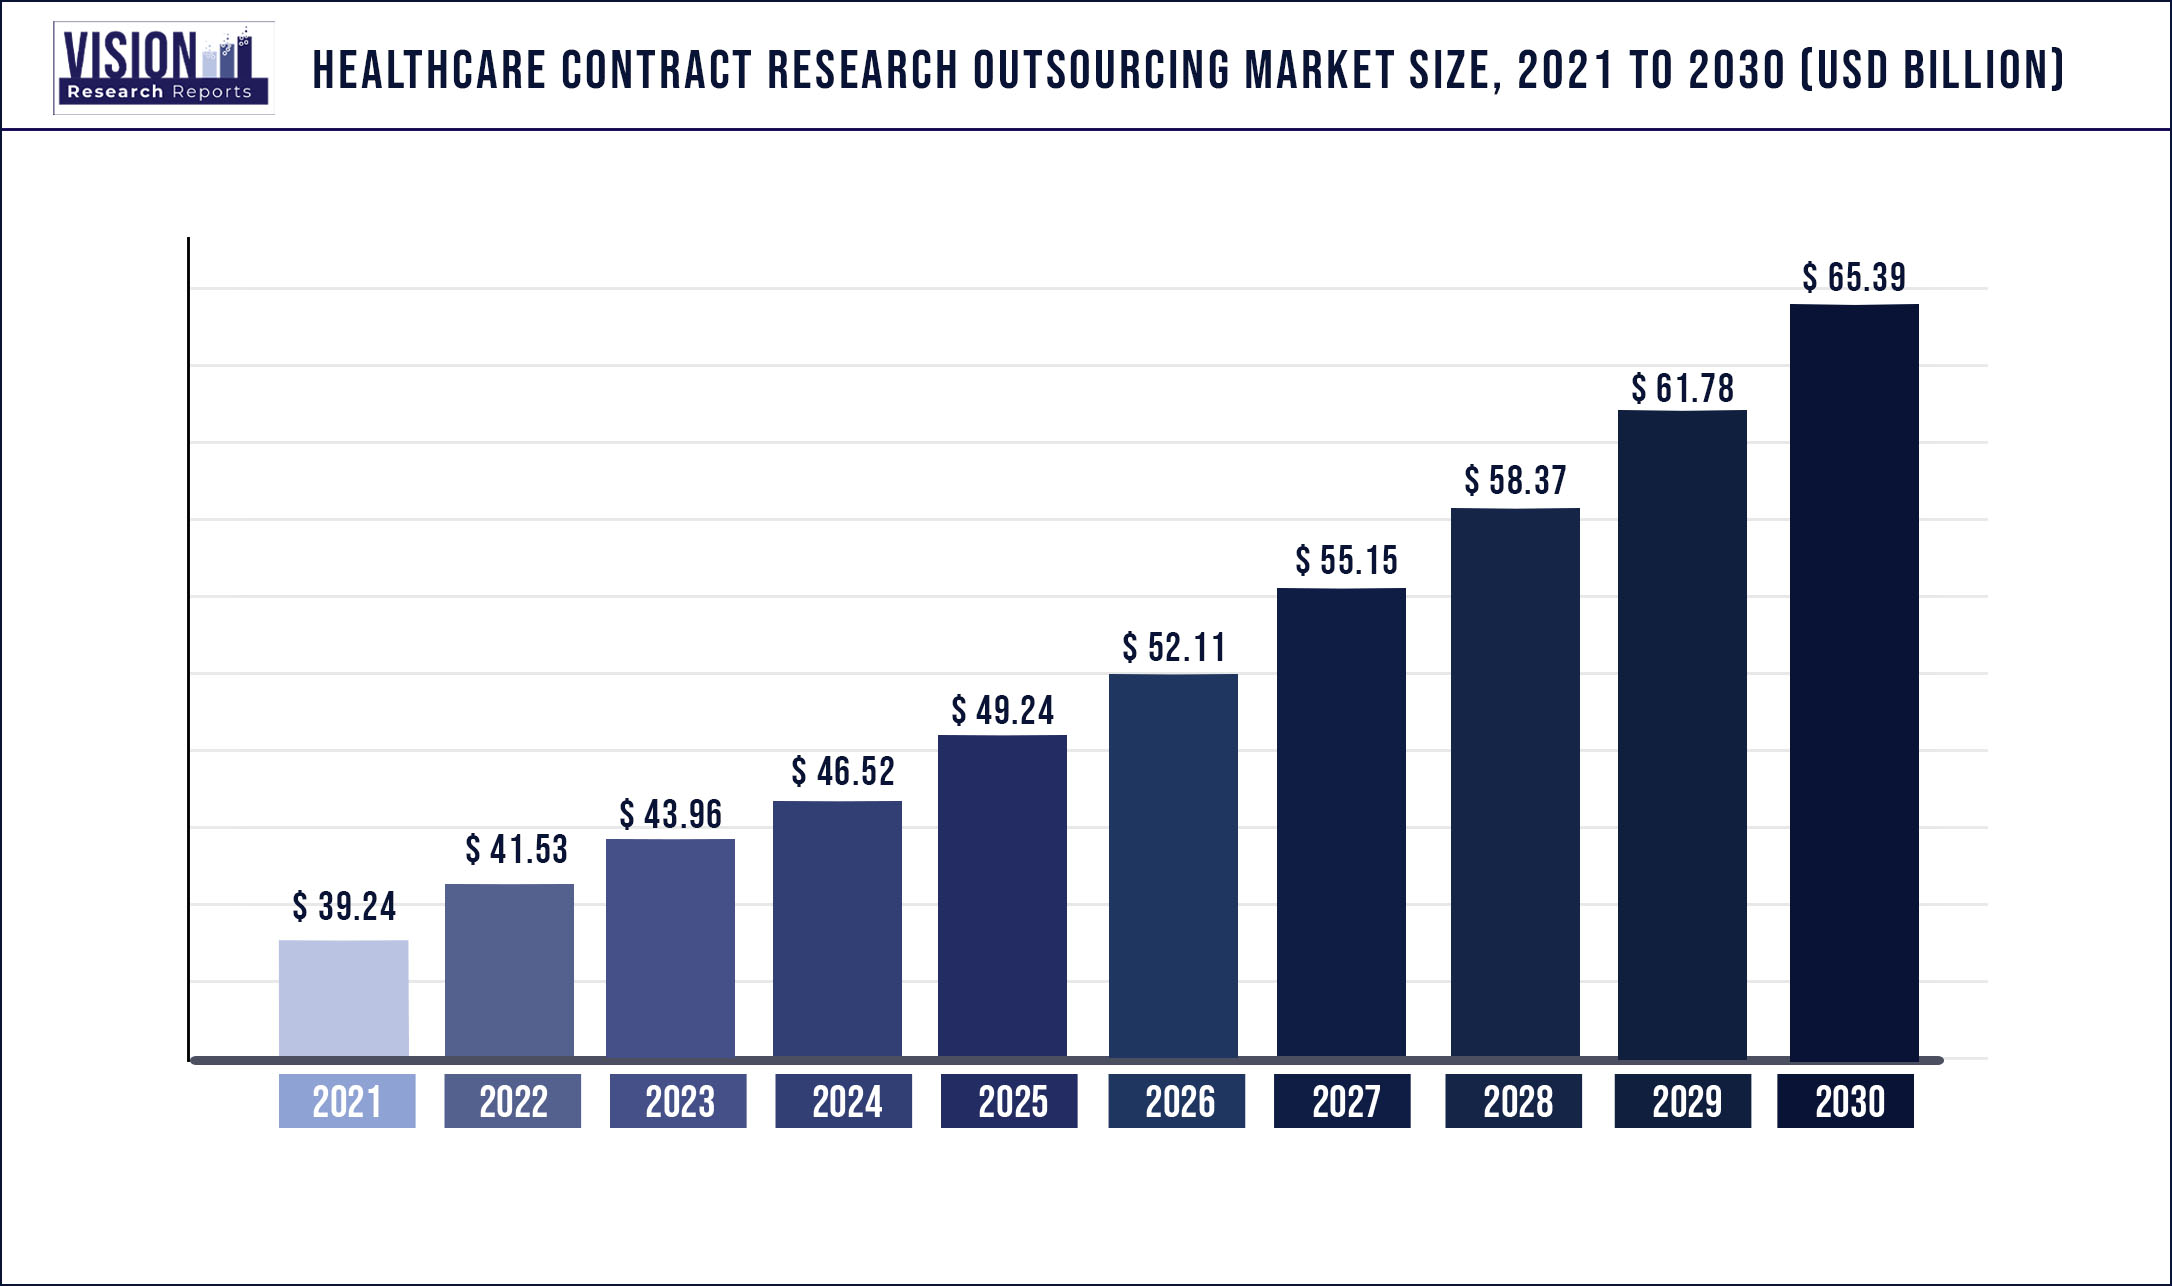 Healthcare Contract Research Outsourcing Market Size 2021 to 2030